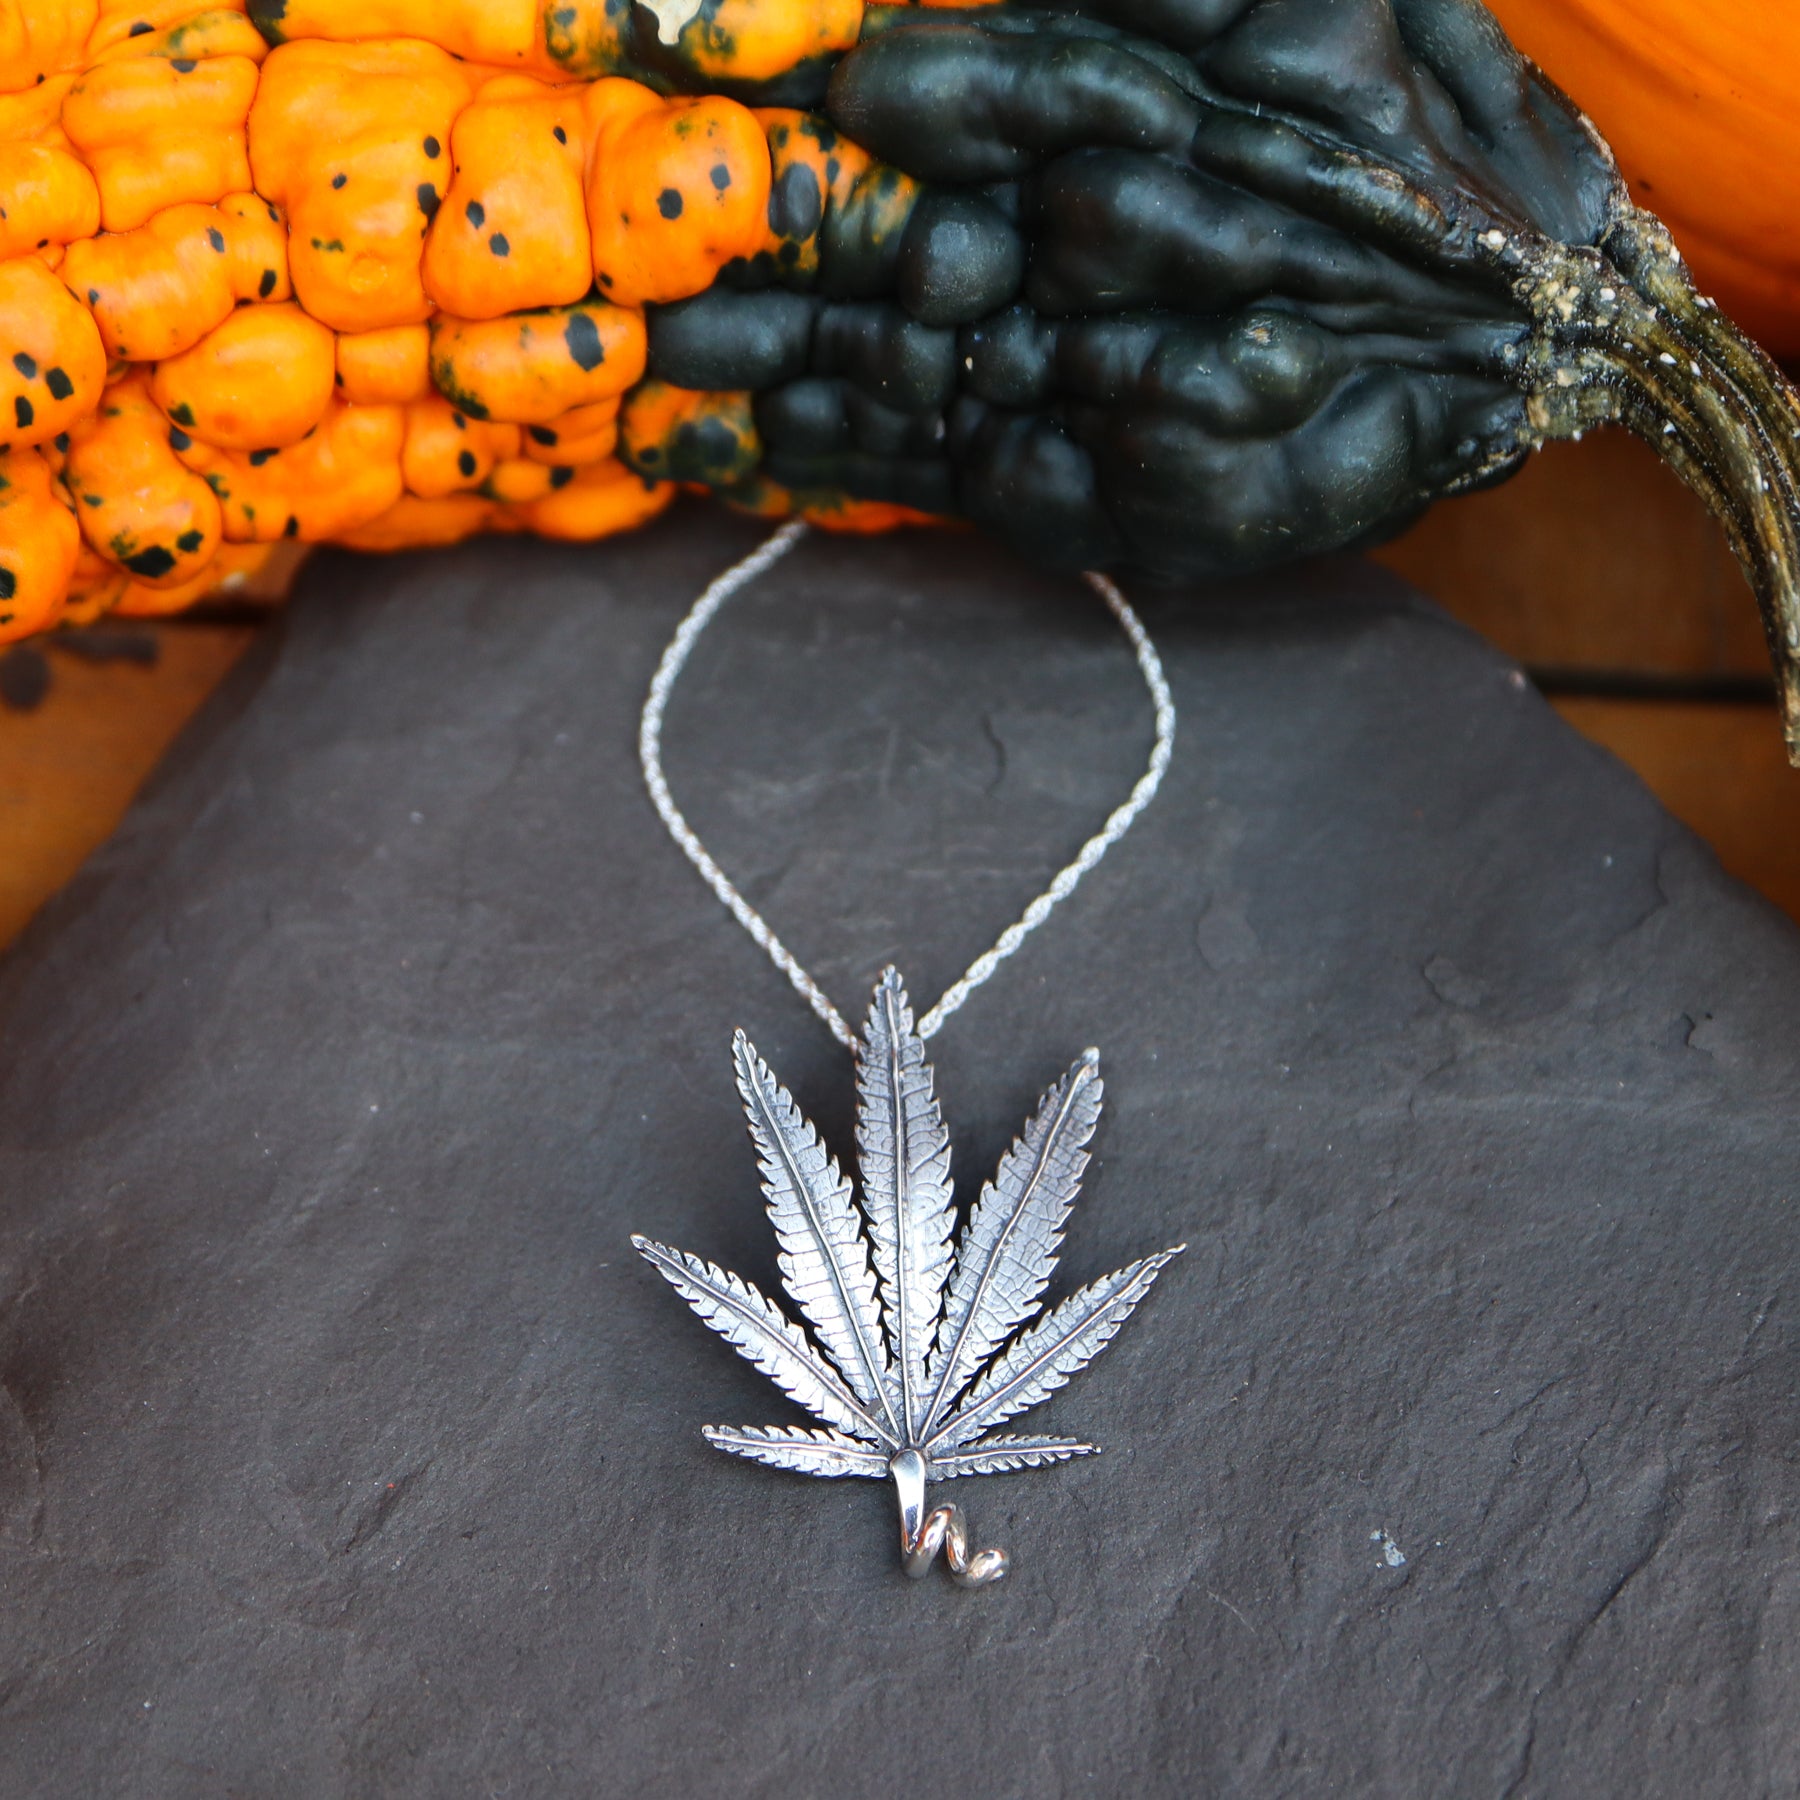 A sterling silver handmade cannabis leaf pendant necklace is about 1.25 inches tall and shown on a dark grey piece of slate. There are orange and green gourds around the necklace.